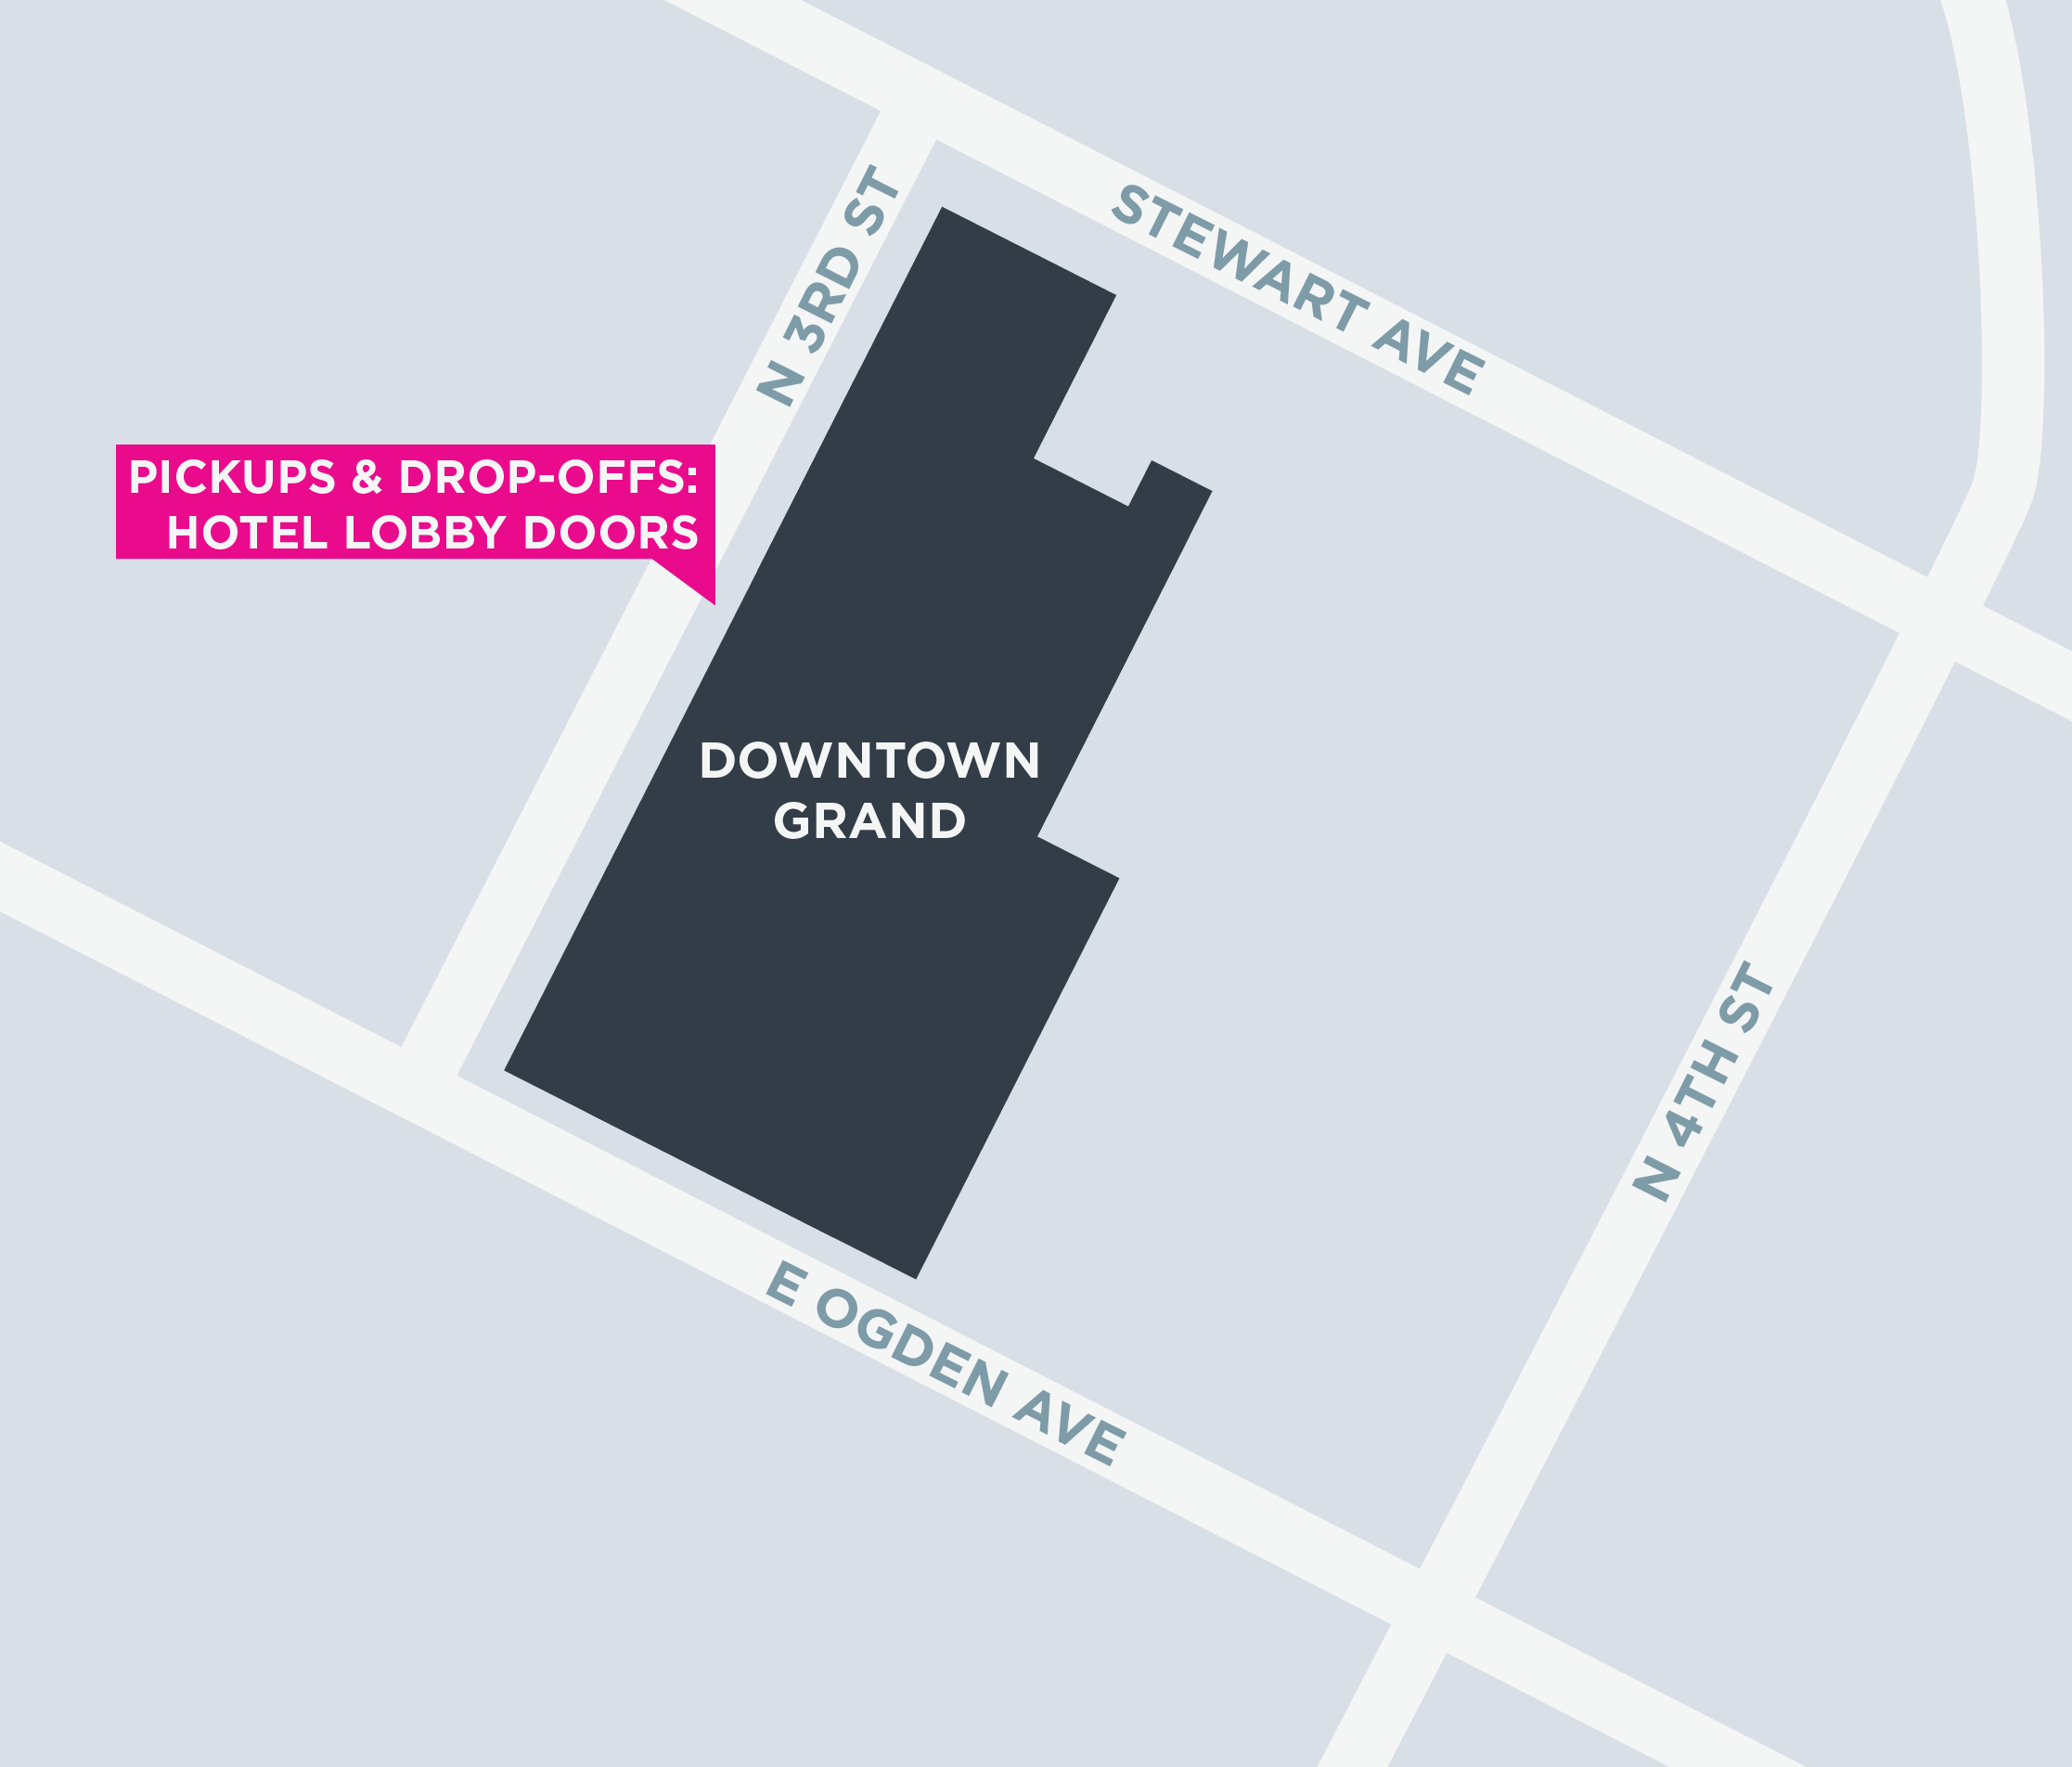 This image shows a map of the Downtown Grand, including pickup and dropoff areas.